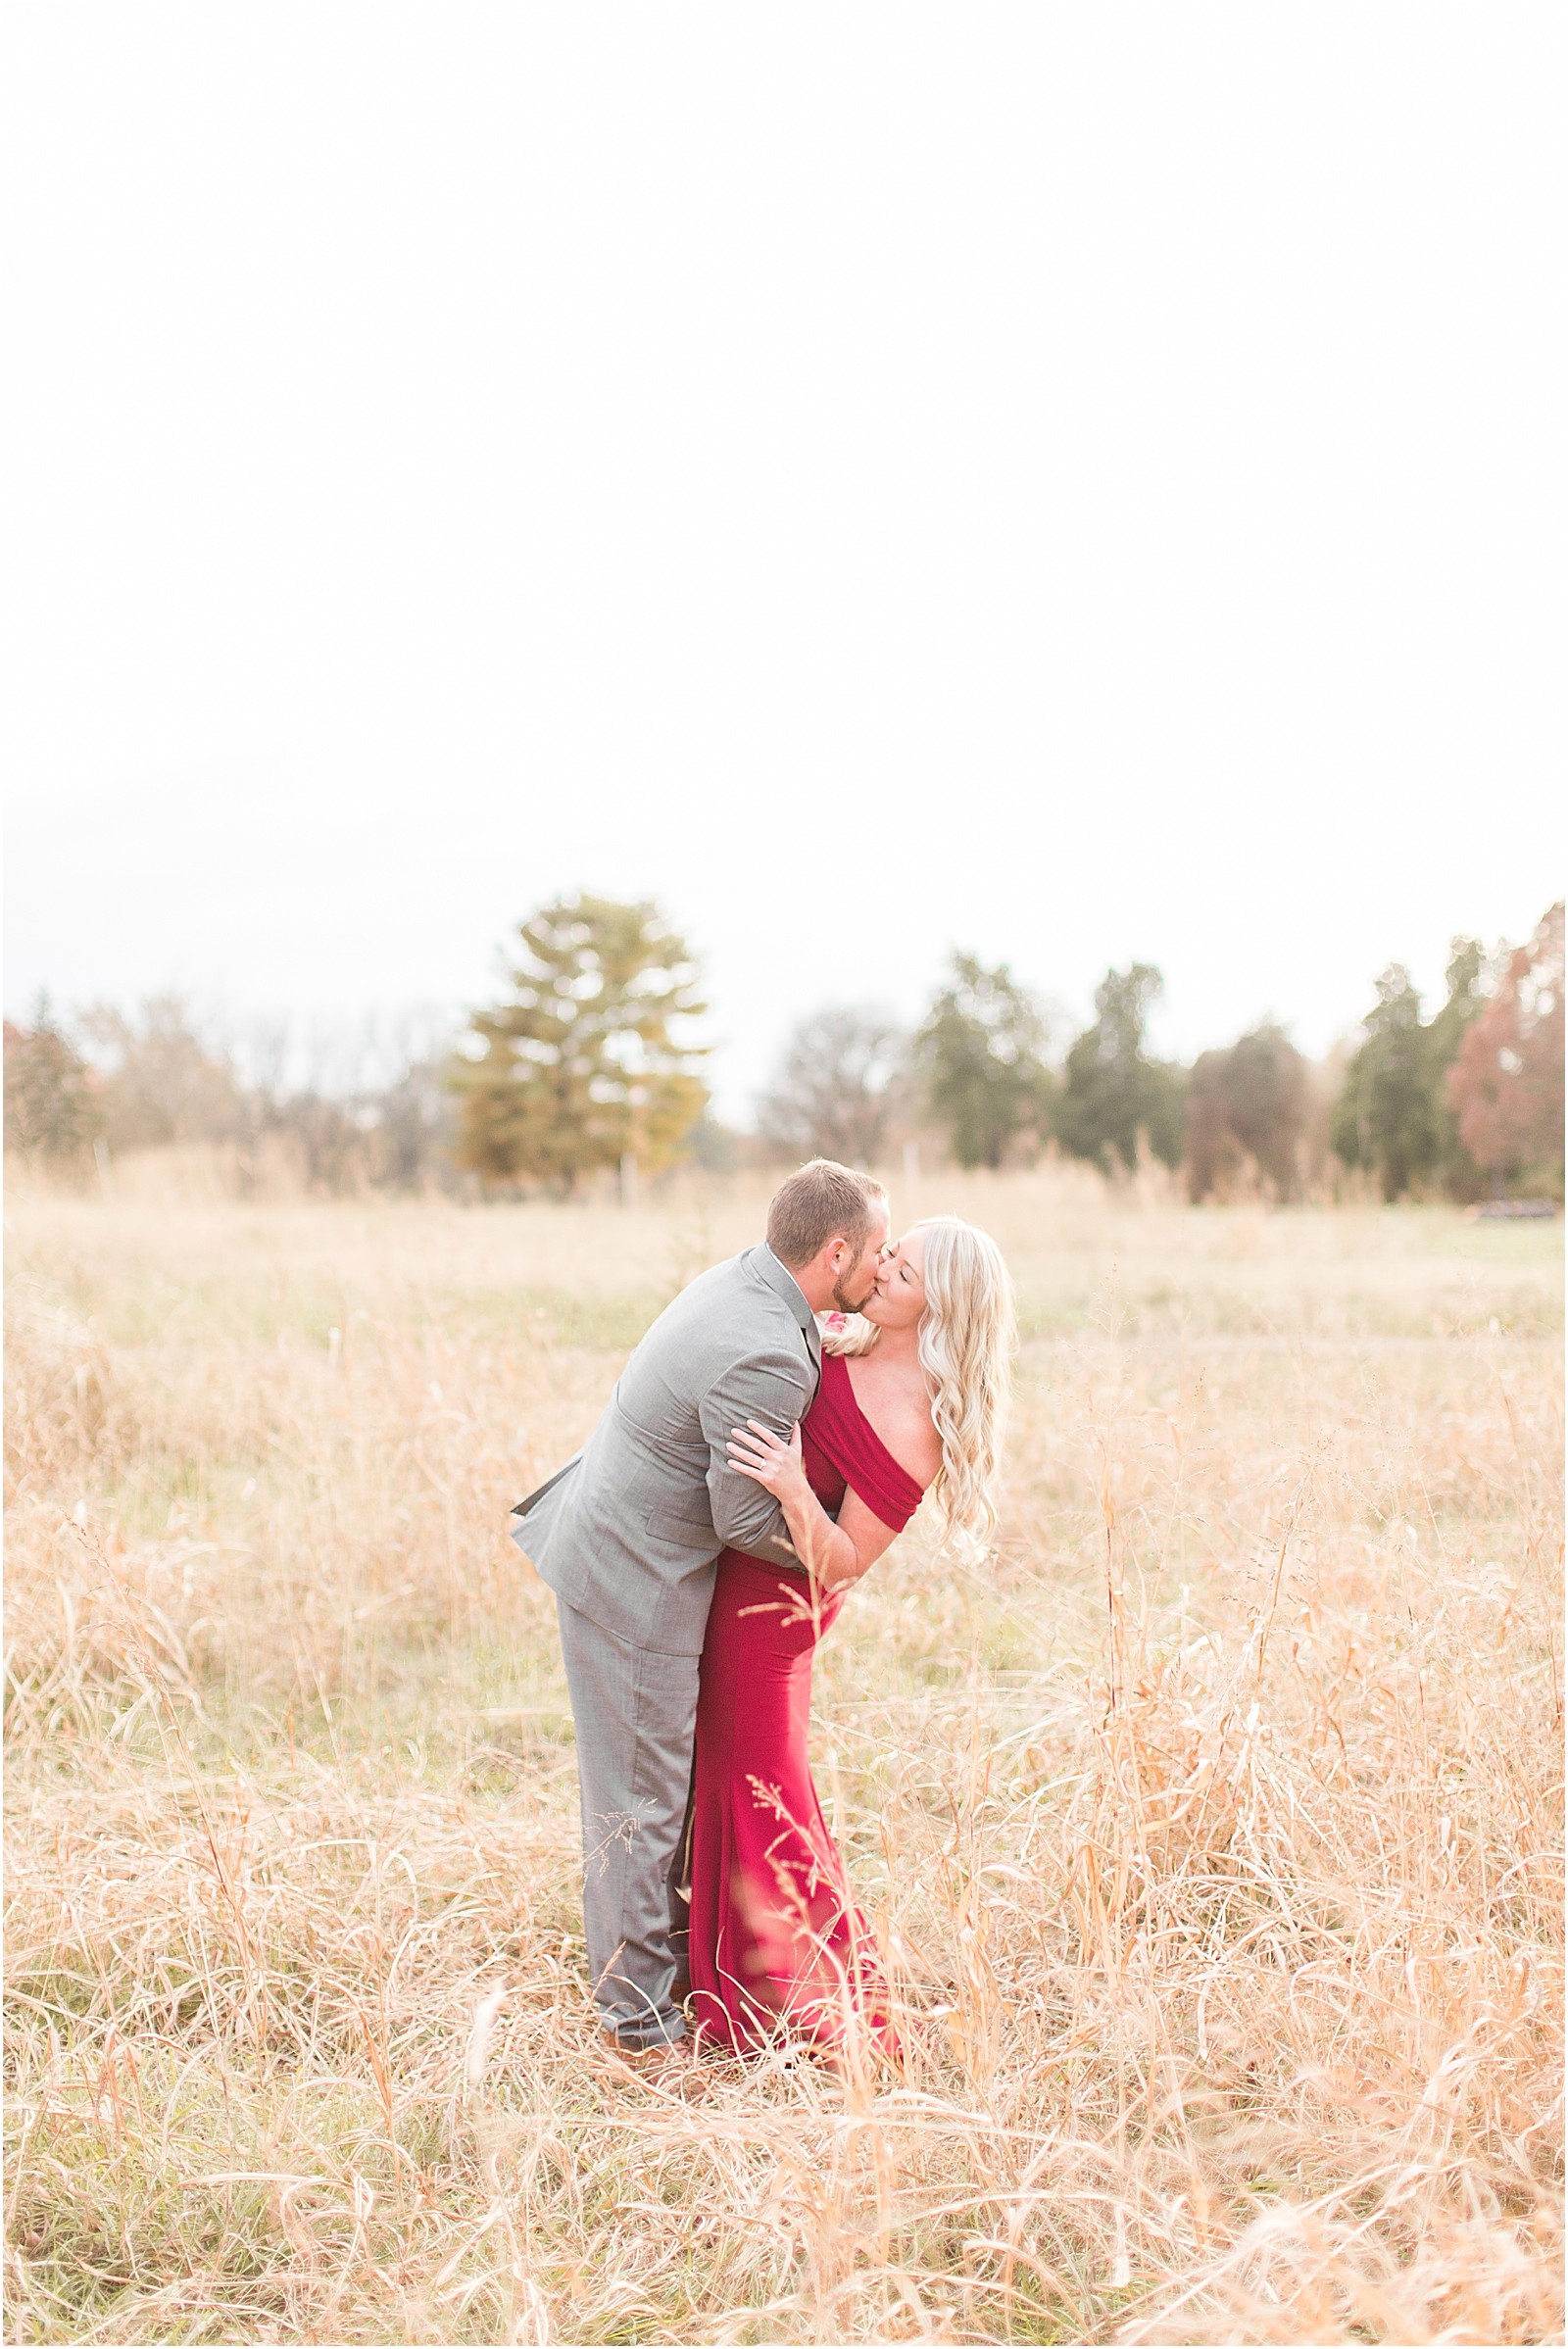 A Perfect Fall Engagement Session at Evansville State Park | Jamie and Max | Bret and Brandie Photography 025.jpg